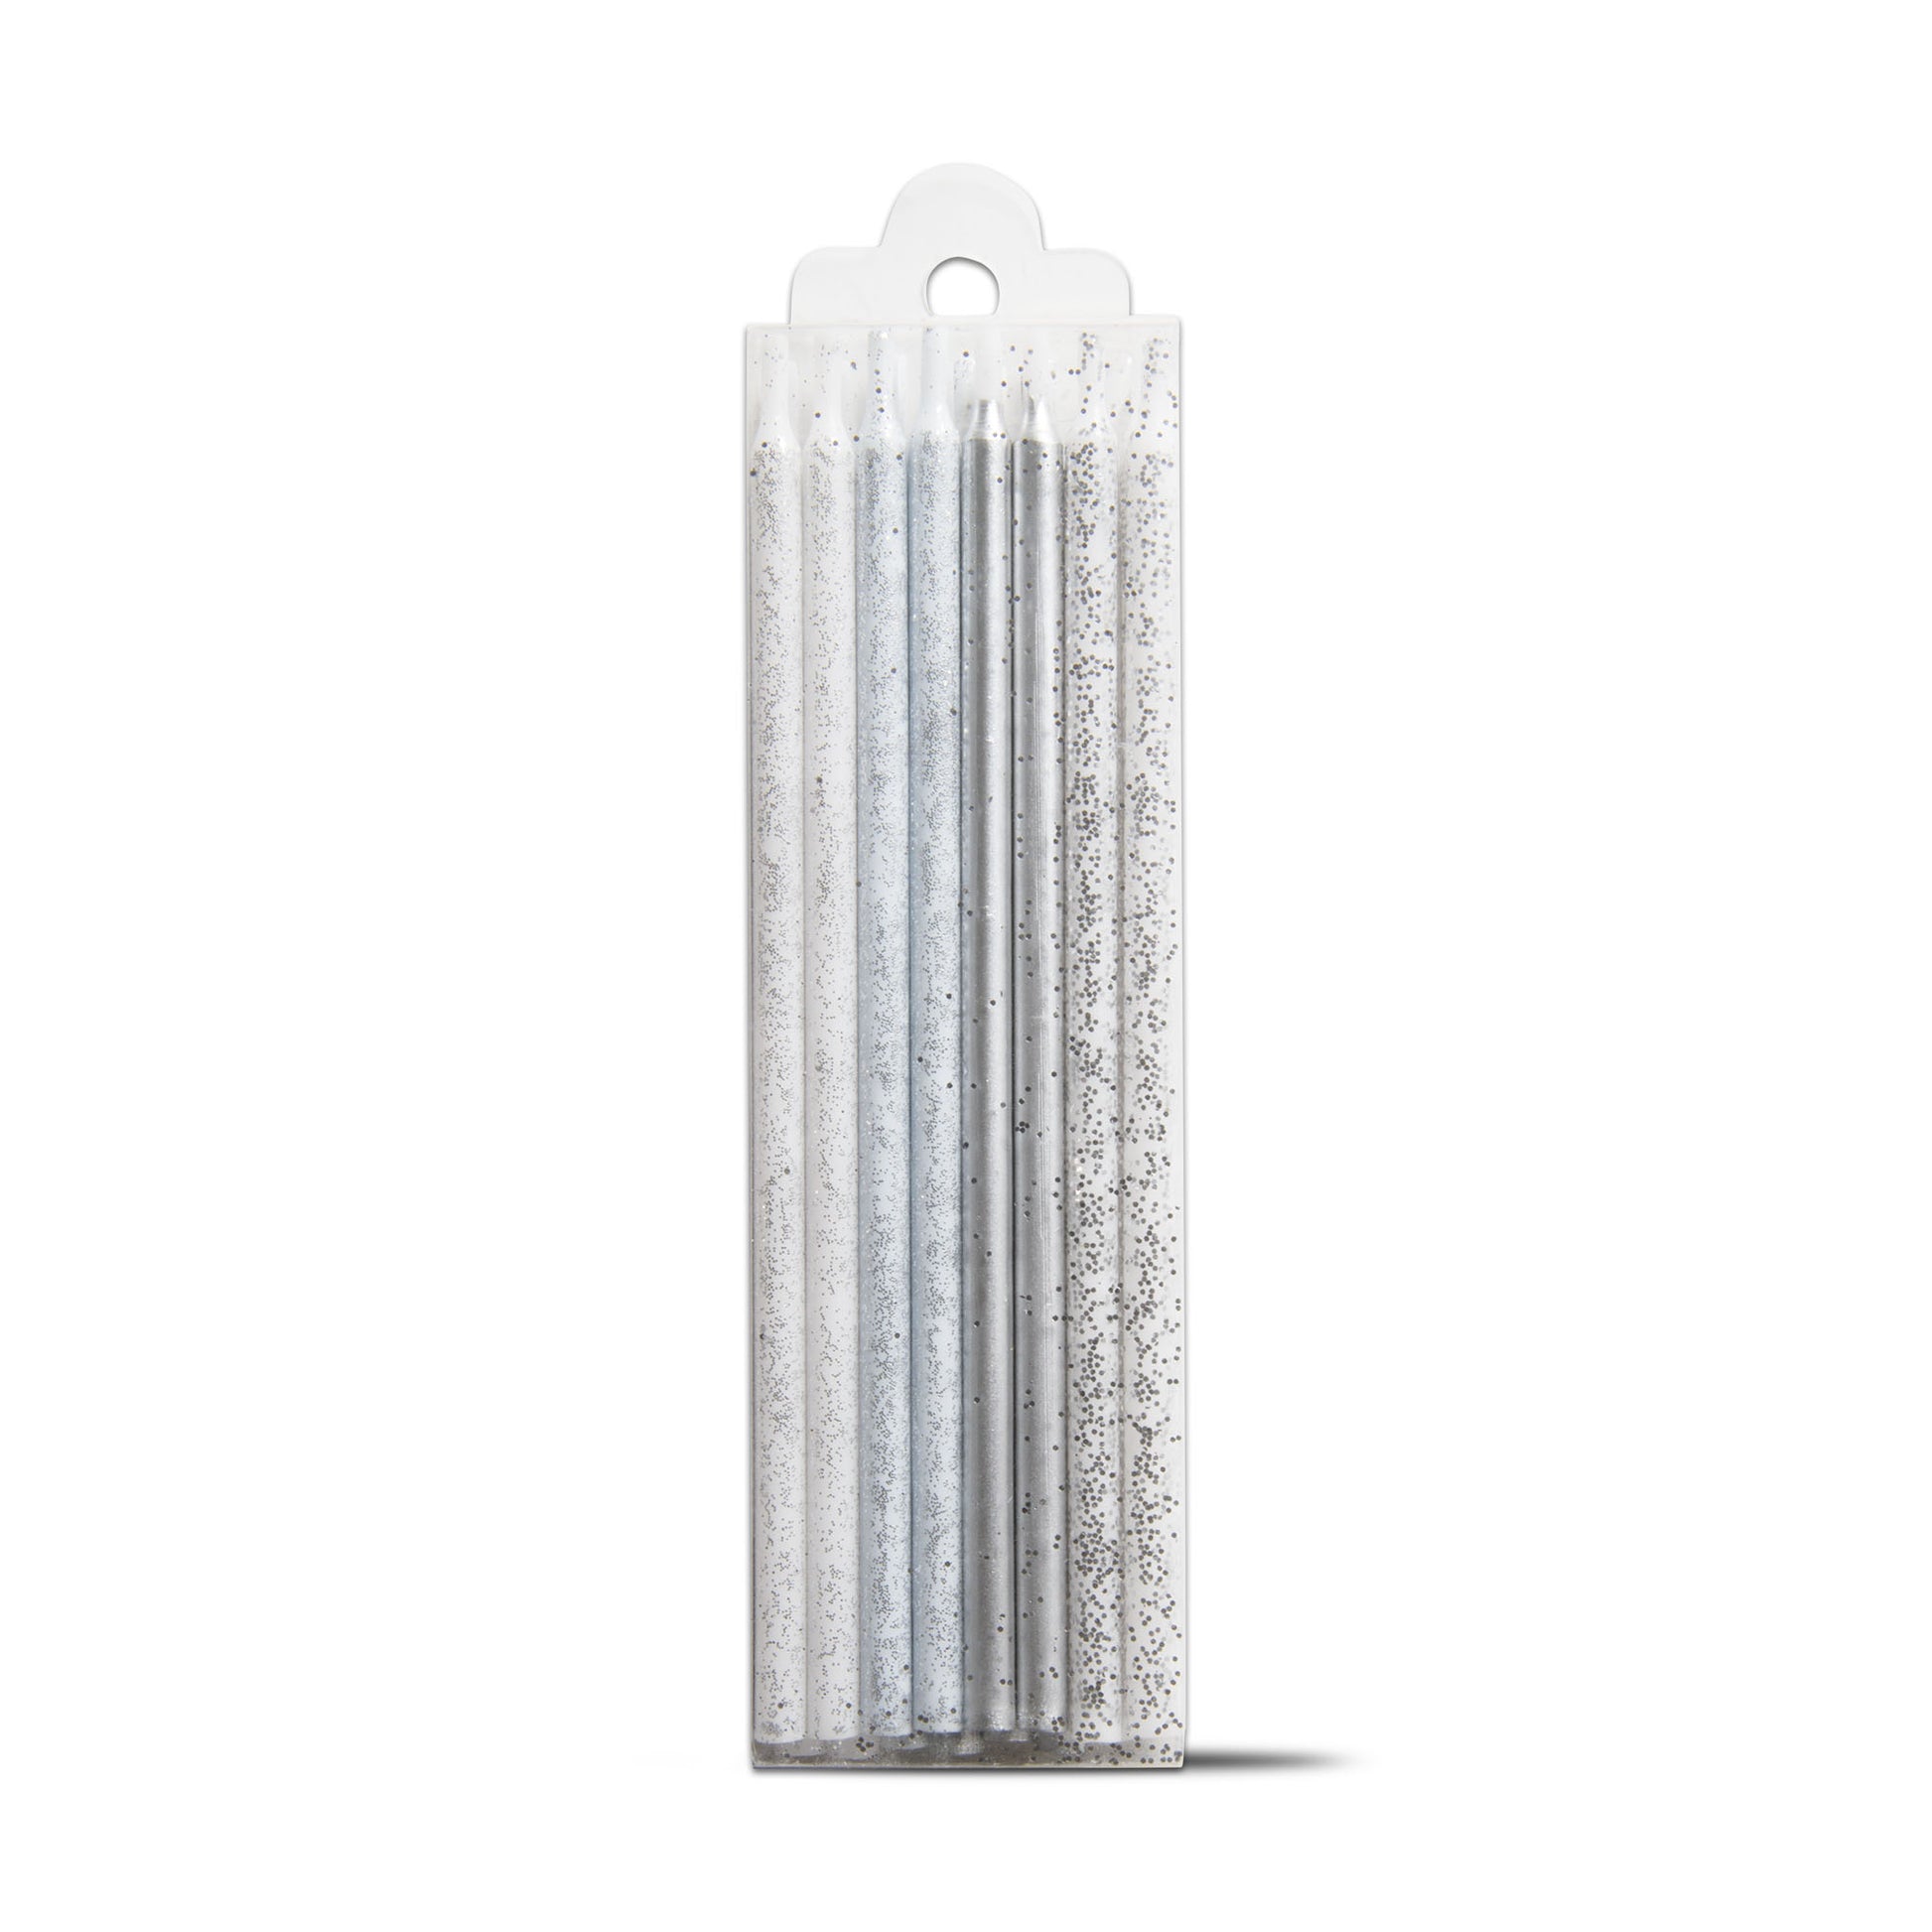 package of silver glittered candles on white background.